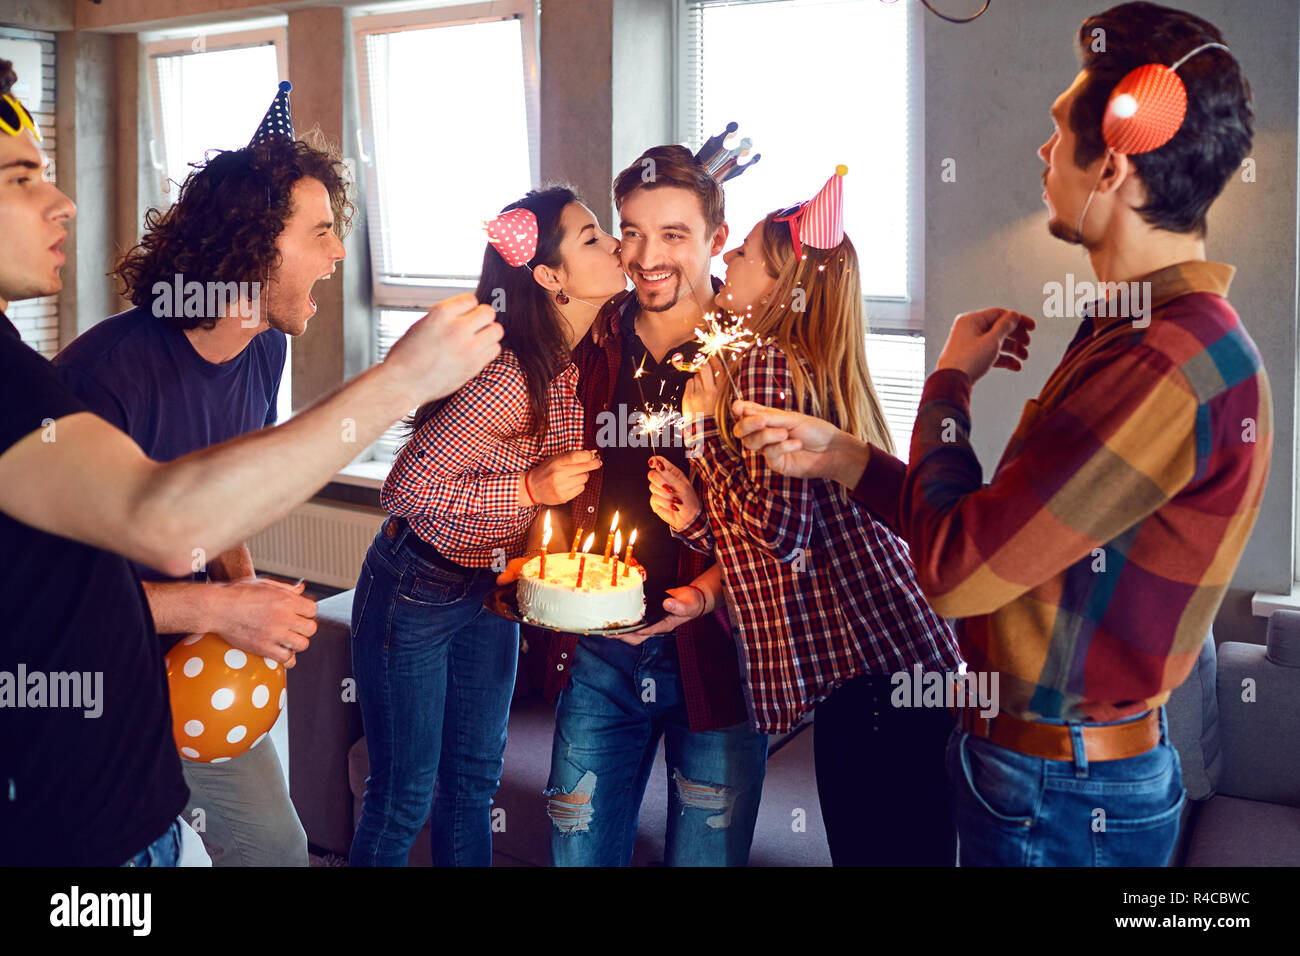 Friends with birthday cake  celebrating birthday at a party. Stock Photo